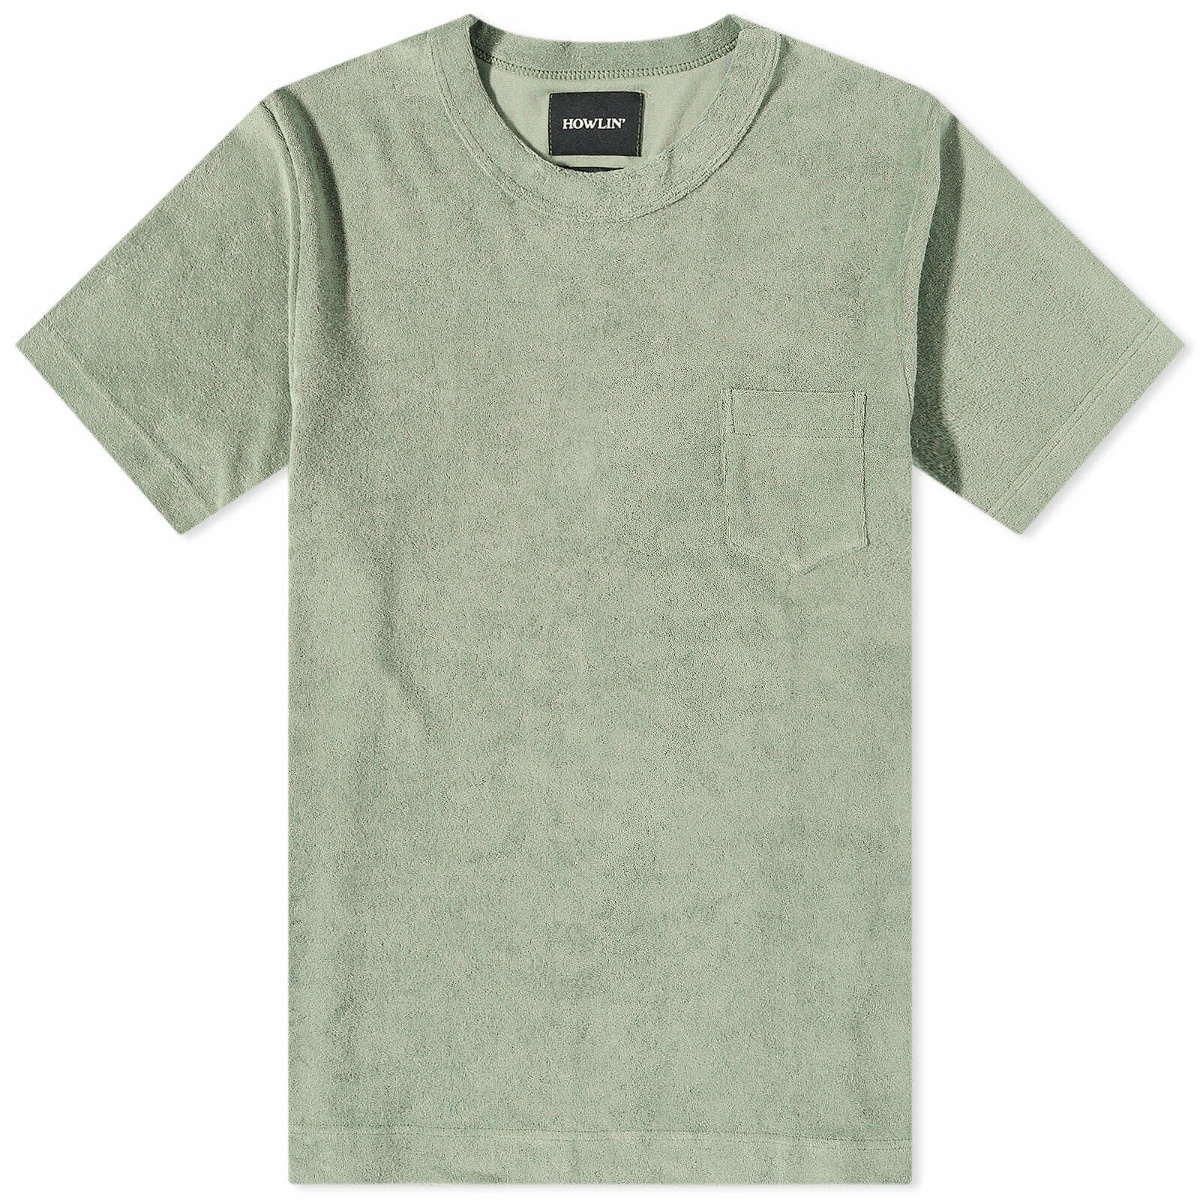 Photo: Howlin by Morrison Men's Howlin' Fons Towelling Pocket T-Shirt in Agave